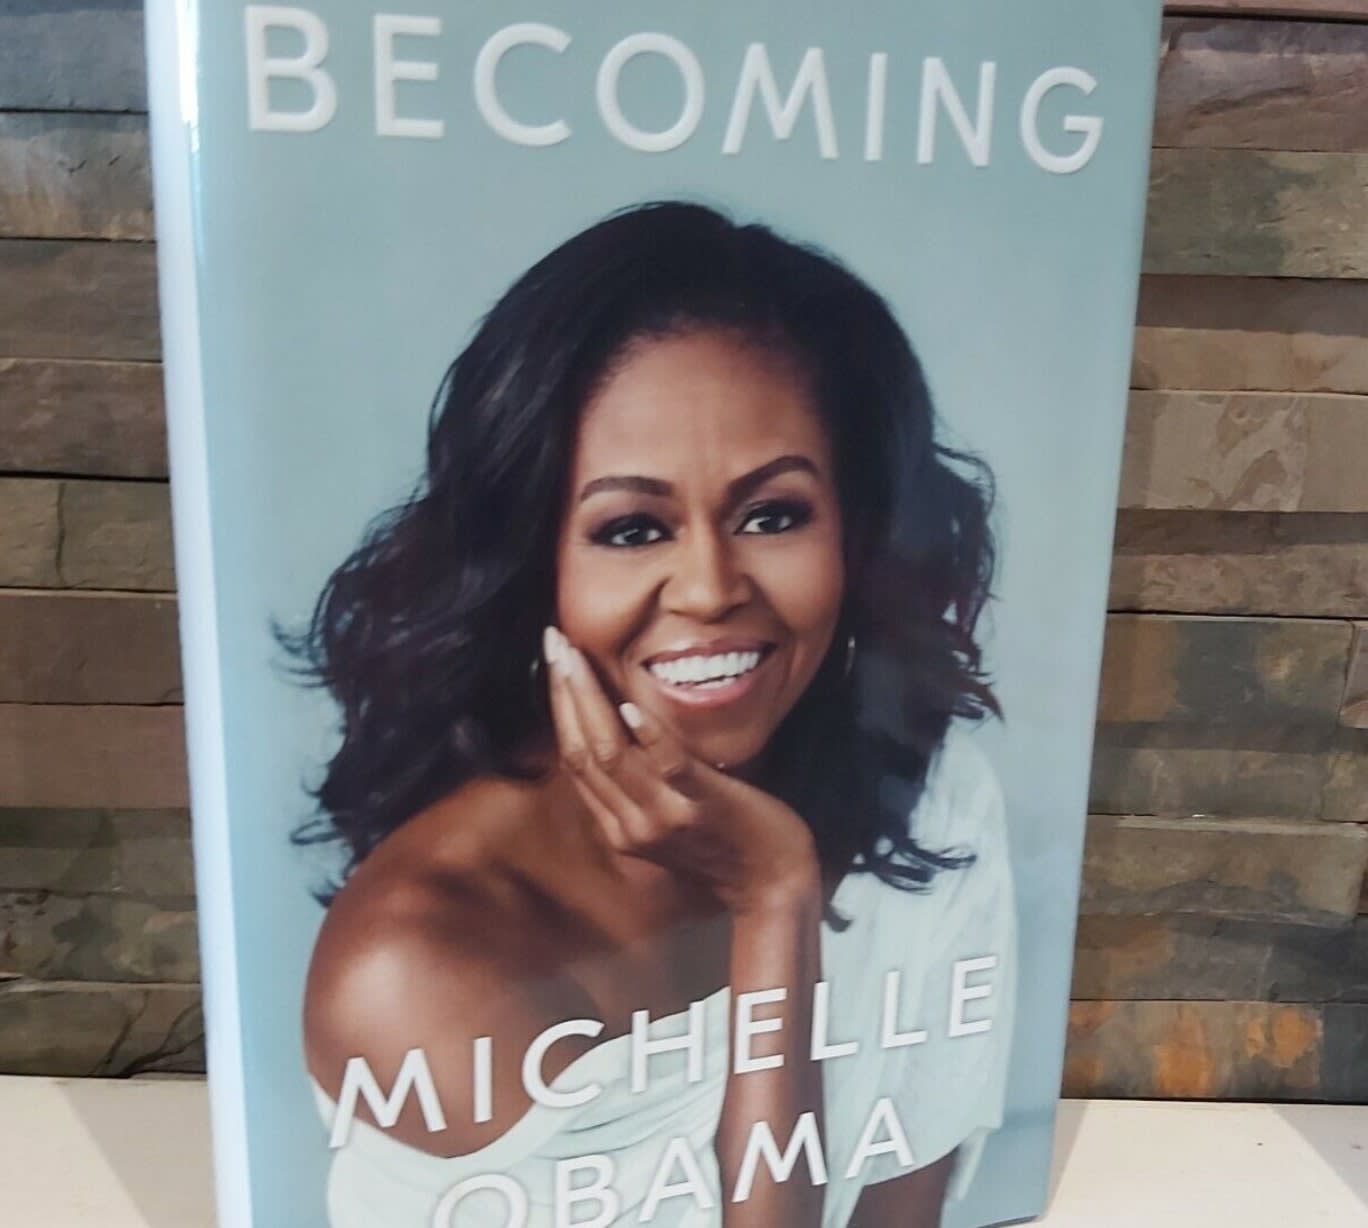 Becoming by Michelle Obama book second-hand